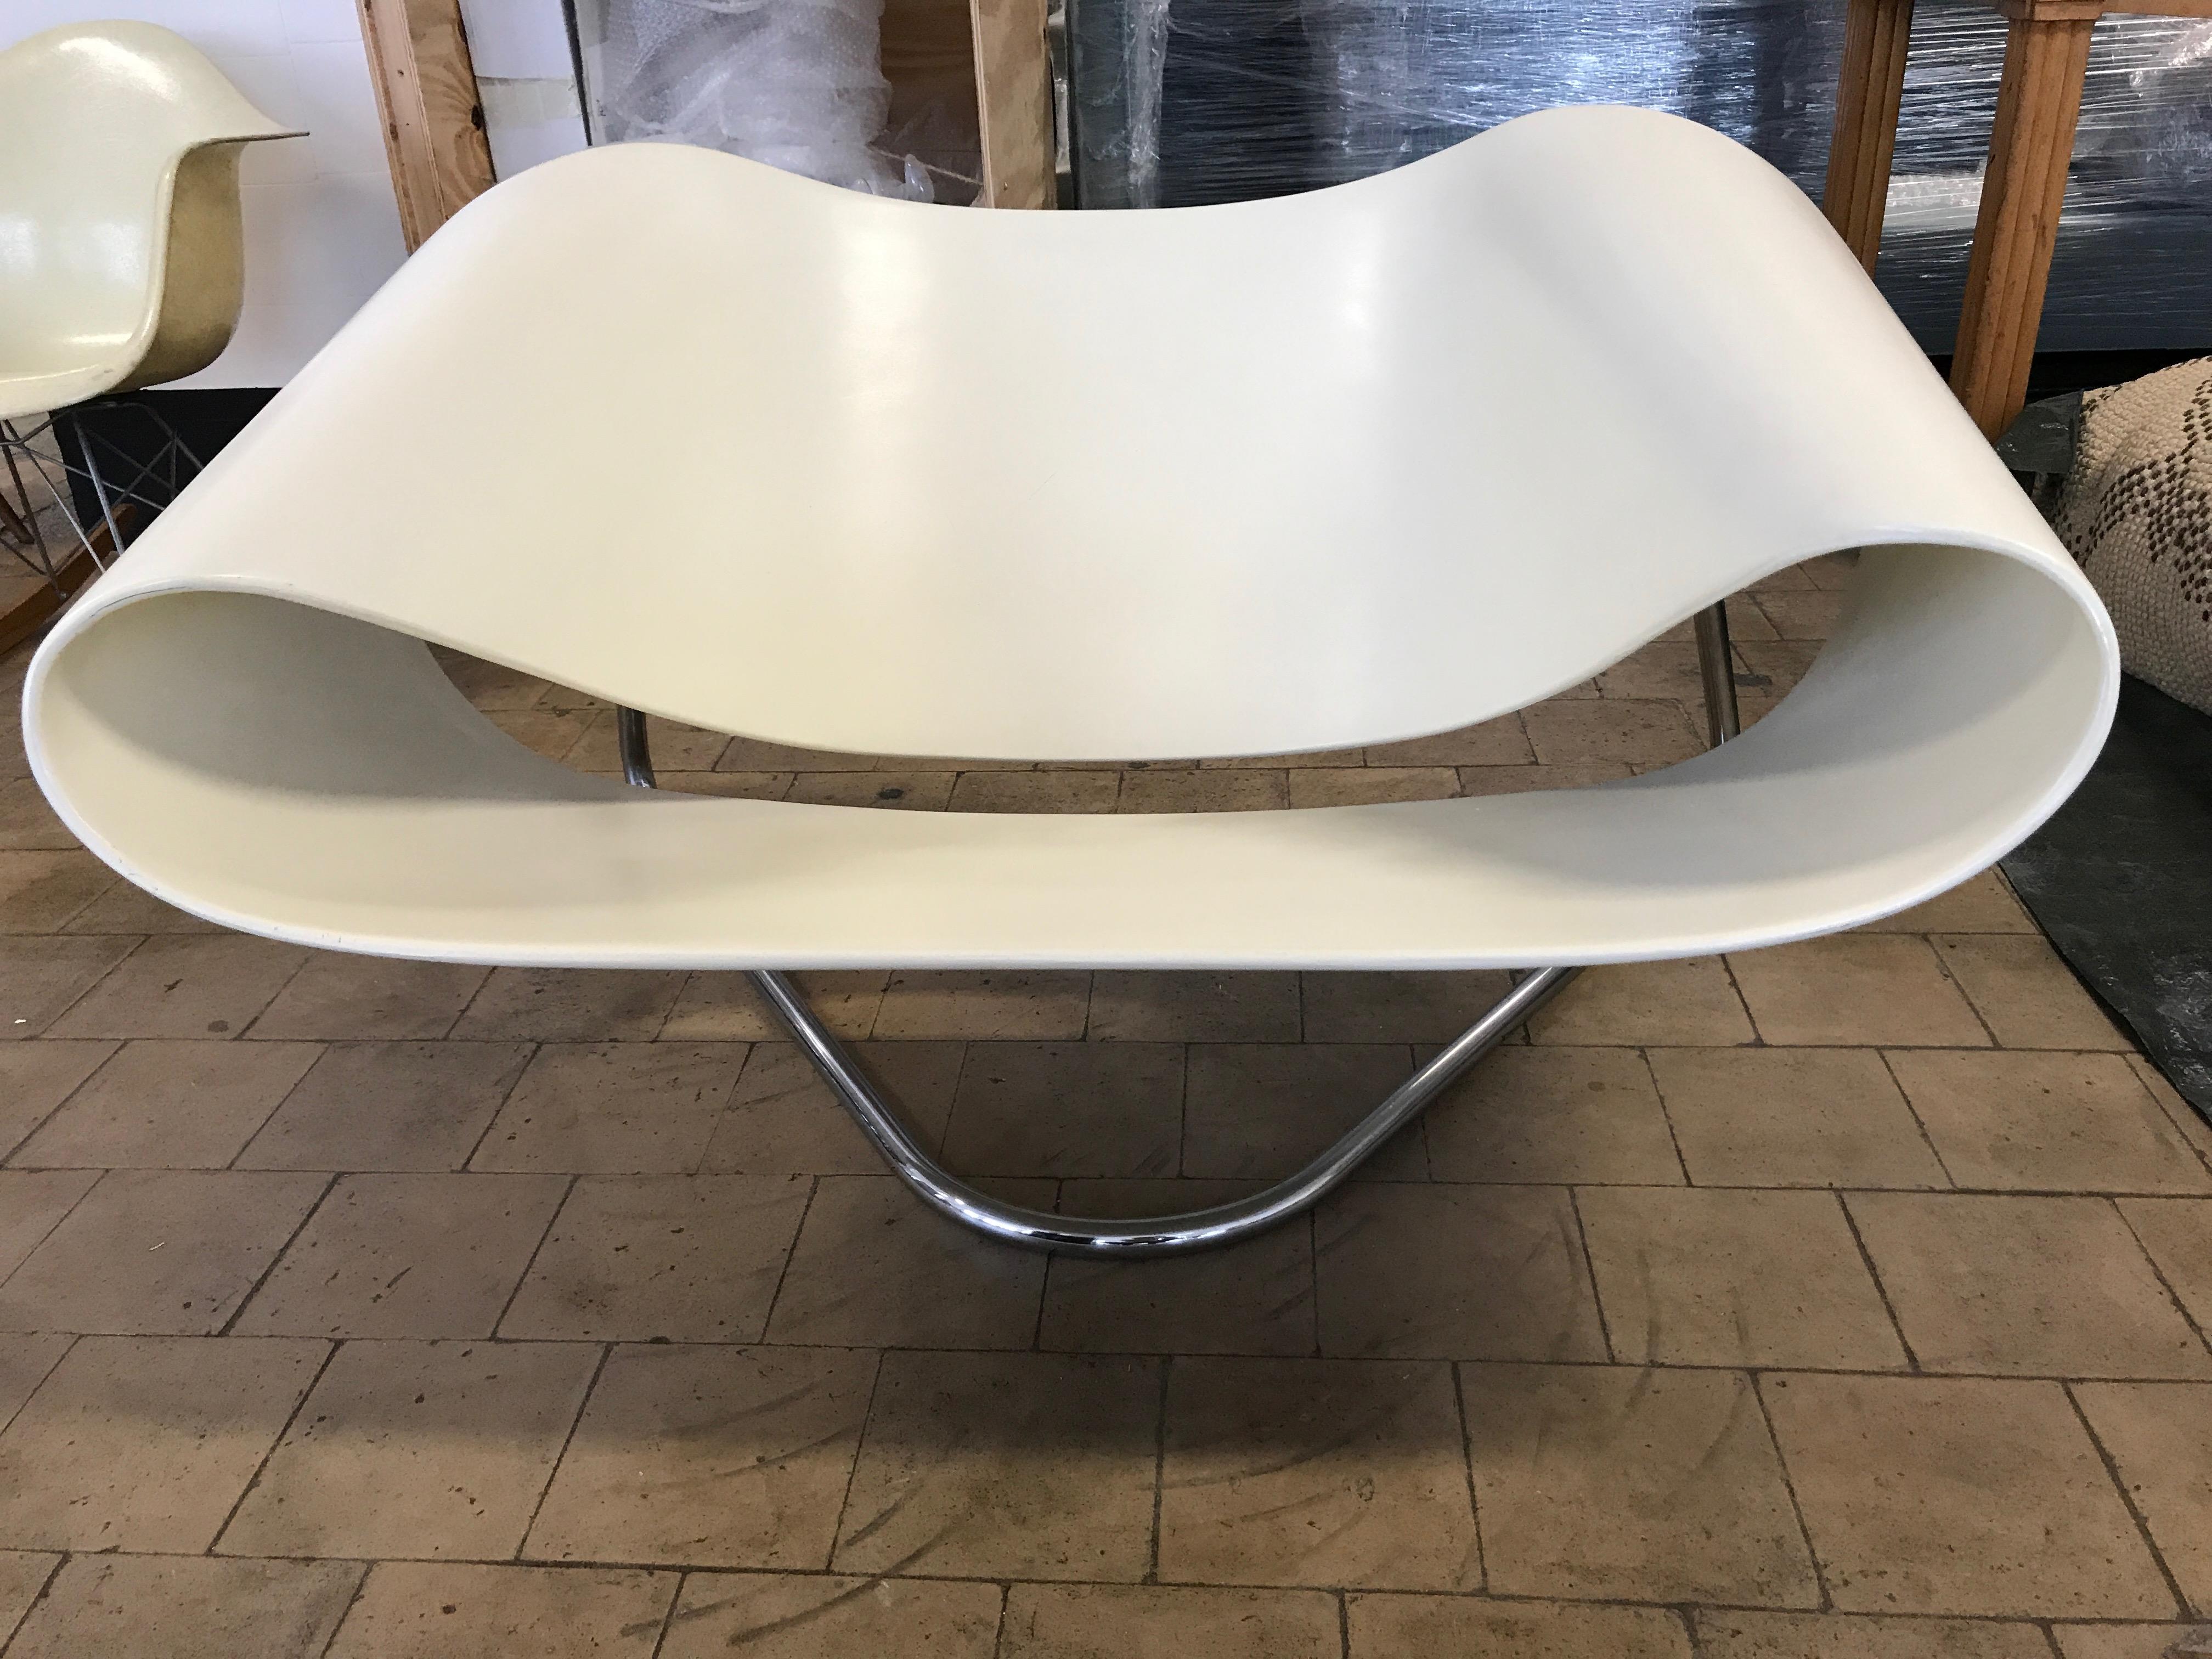 Model CL9 ribbon chair by Cesare Leonardi and Franca Stagi for Bernini / Italy, circa 1961 / Moulded fibreglass seating section on chrome tubular base. Seating base in colour white, matte surface. The continuous band of moulded fibreglass forming